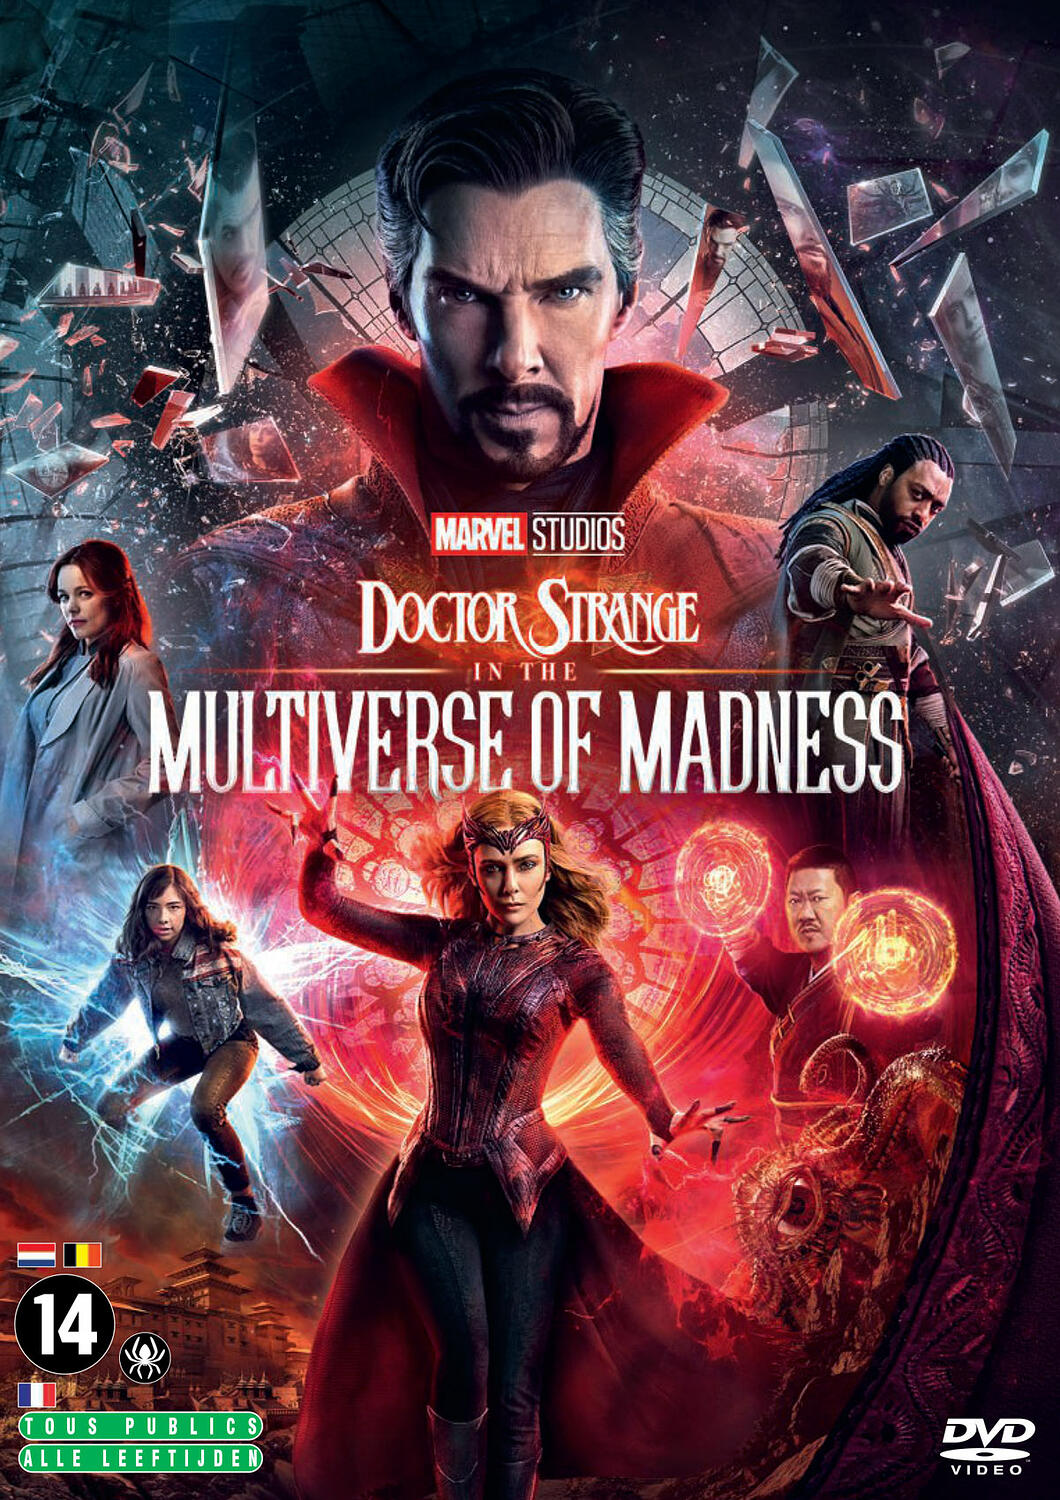 Doctor Strange in the multiverse of madness